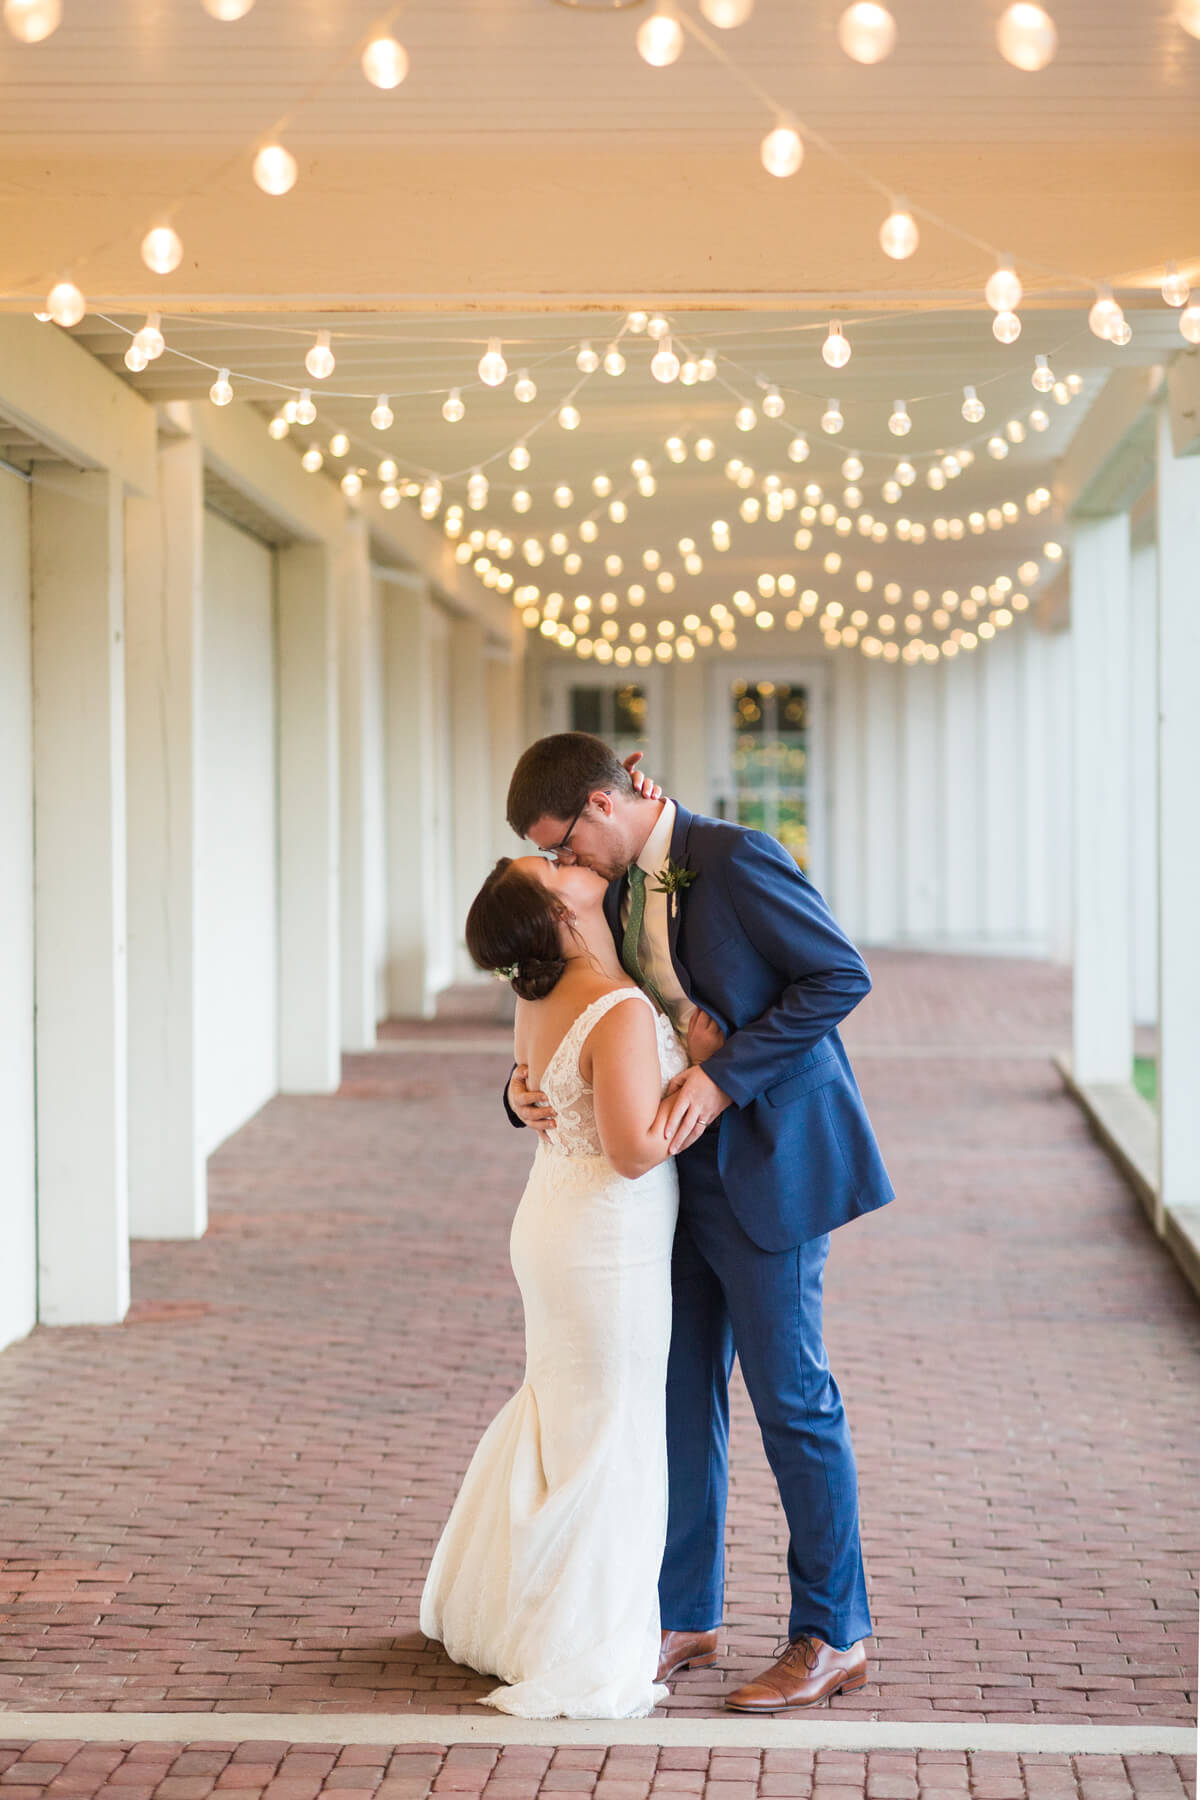 Kissing under string lights | Fall Wedding at King Family Vineyards by Virginia Photographers